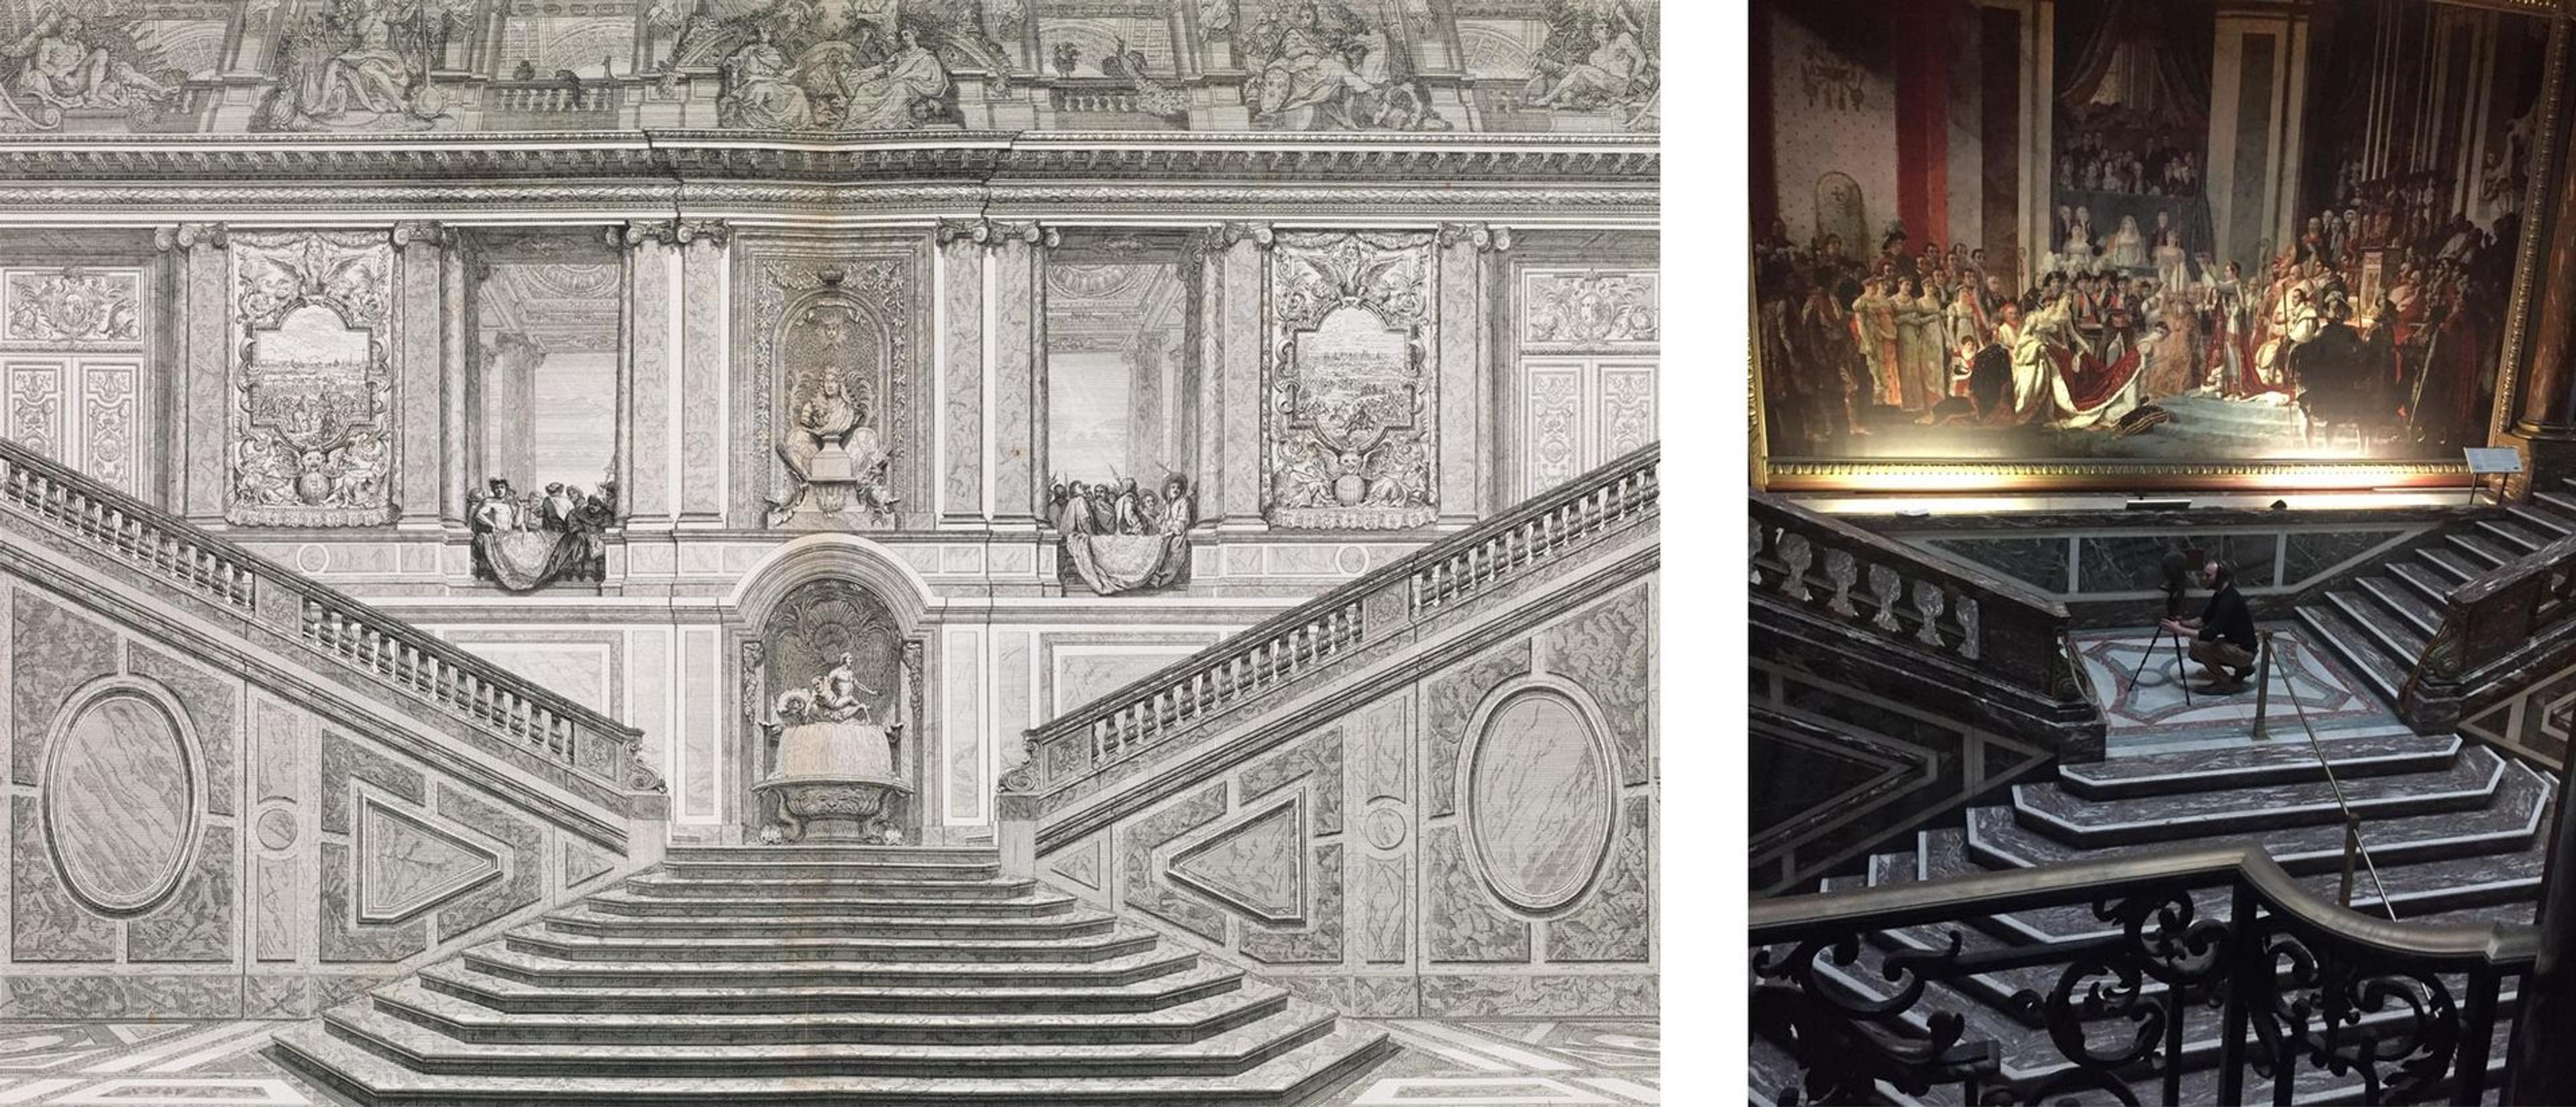 The Ambassadors' Staircase no longer exists at Versailles, but it lives on at Oldway. We remain indebted to the local Torbay Council, which now owns the estate. At right, Chris Timpson sets up the binaural head on the landing of Oldway's Hall of Mirrors. Photo by Nina Diamond. Left: "View of the Ambassadors' Staircase" (detail), plate 6 from Le Grand Escalier du Château du Versailles (Paris: Louis Surugue, 1725). The Metropolitan Museum of Art, New York, Purchase, Rogers Fund, 1918, transferred from the Library (1911.1073.55)